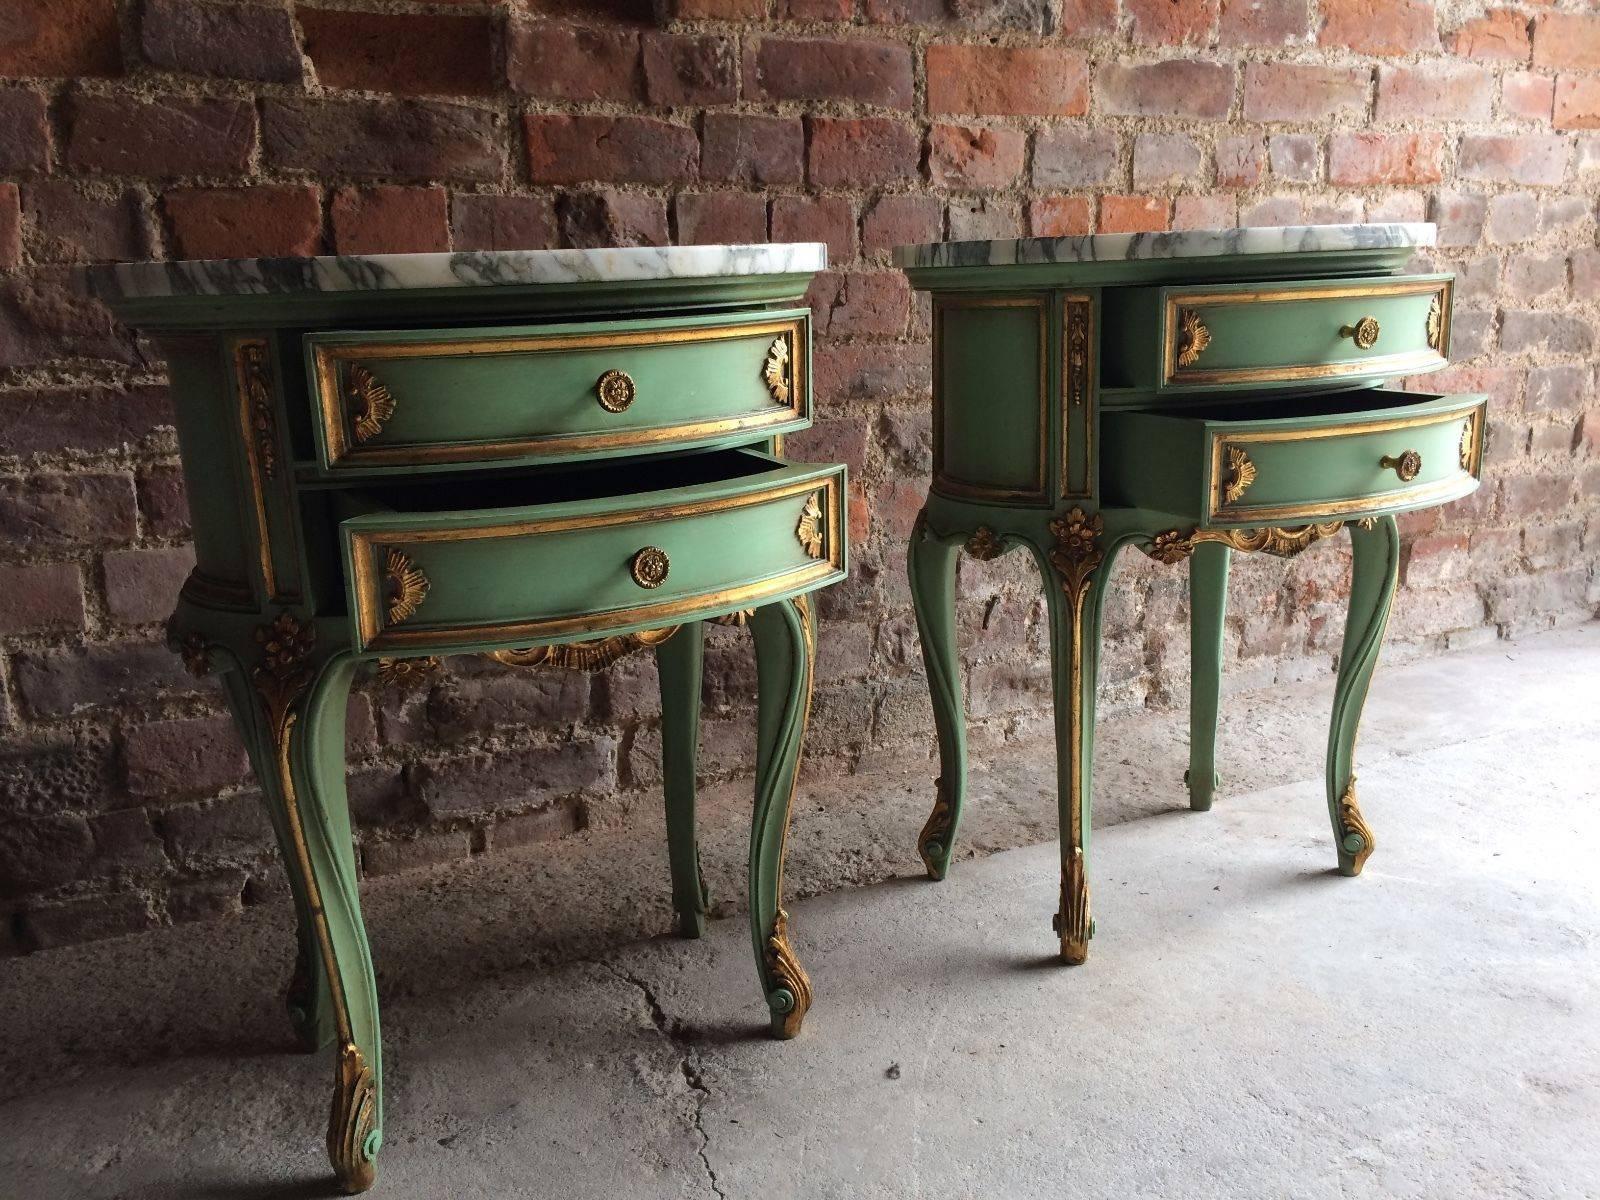 Stunning pair of French Rococo style marble topped bedside tables 

Description:

A fabulous pair of French Rococo style marble topped green painted beside tables, having a wonderful green veined marble top fitted with two small drawers and